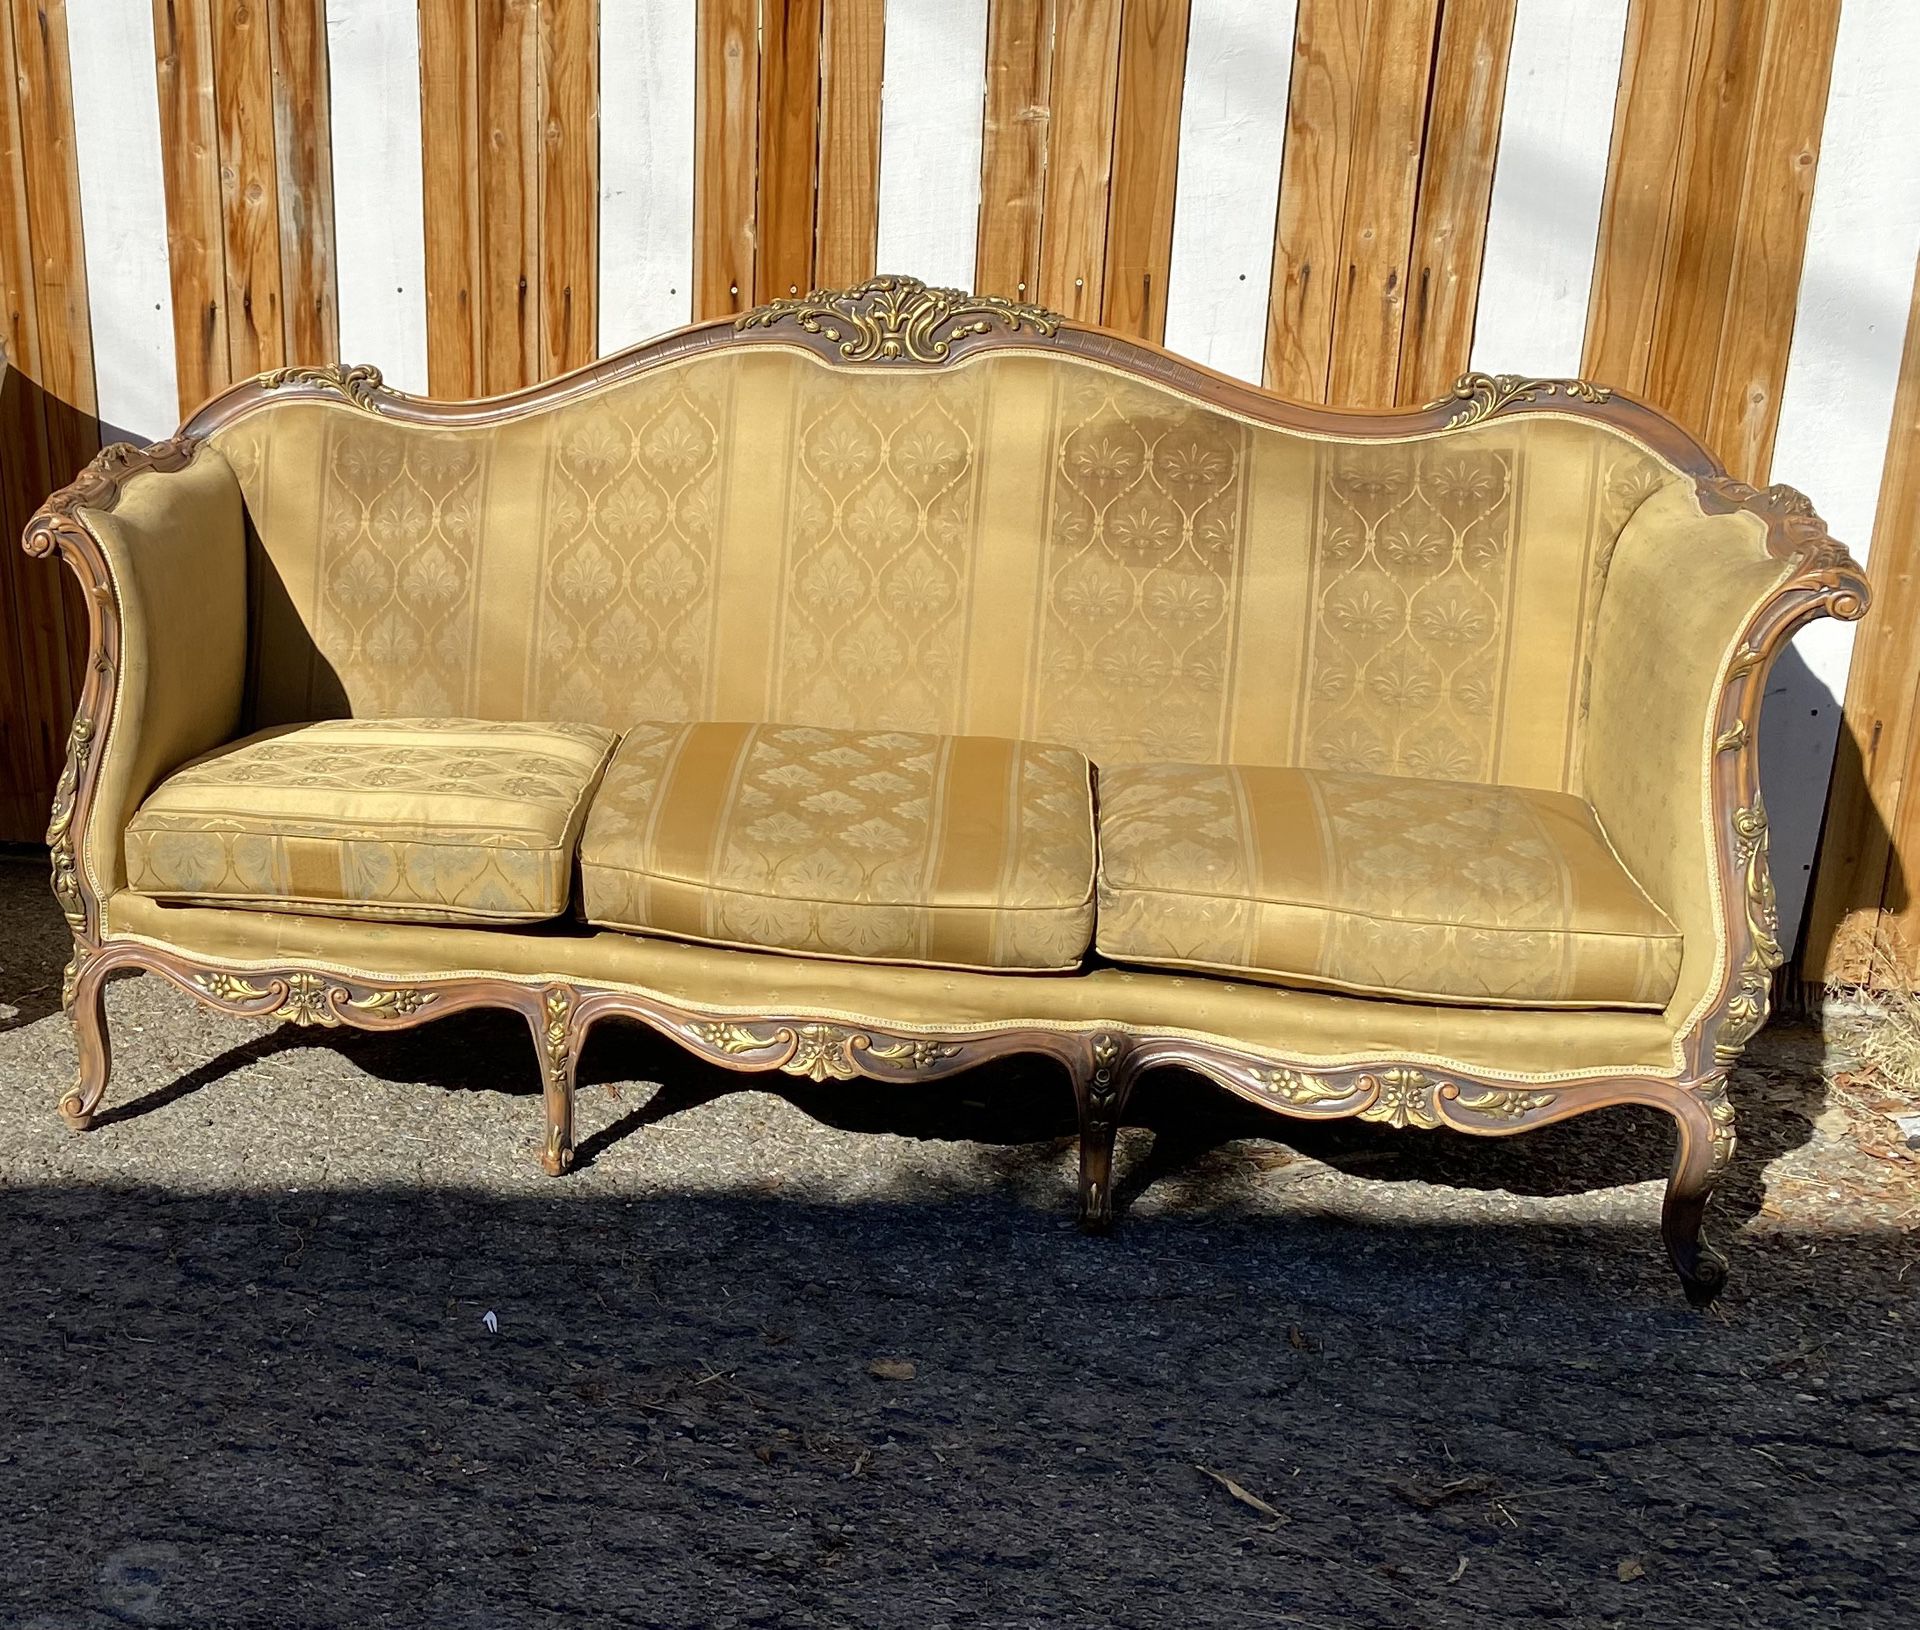 Beautiful Large Antique Couch Sofa Gold Brown Italian Love Seat Chairs  Excellent Condition Sturdy Italy